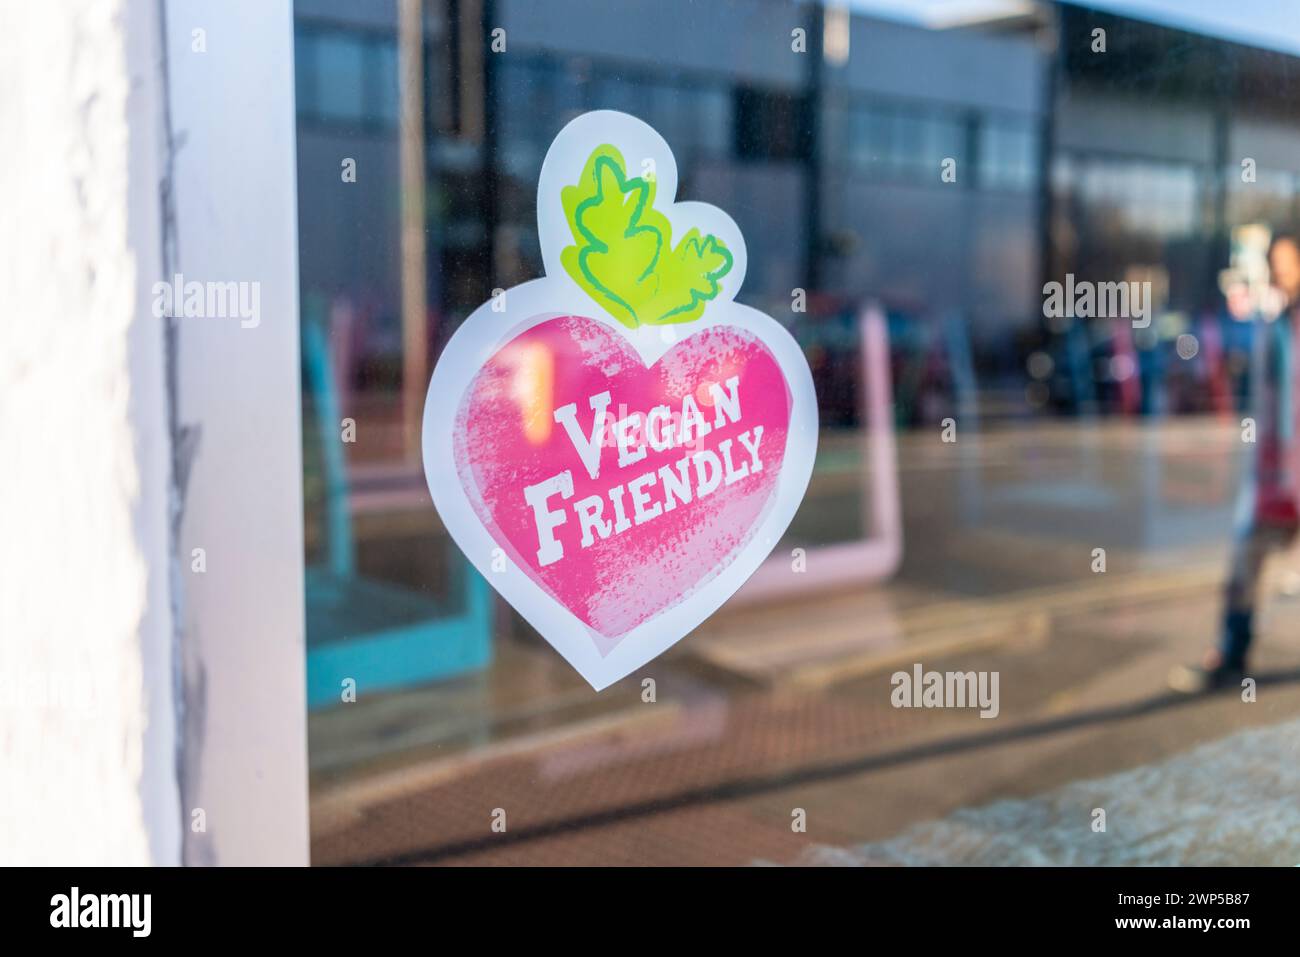 Vegan friendly sticker on a window in the shape of a heart vegetable - vegan friendly concept - Southampton, England, UK Stock Photo